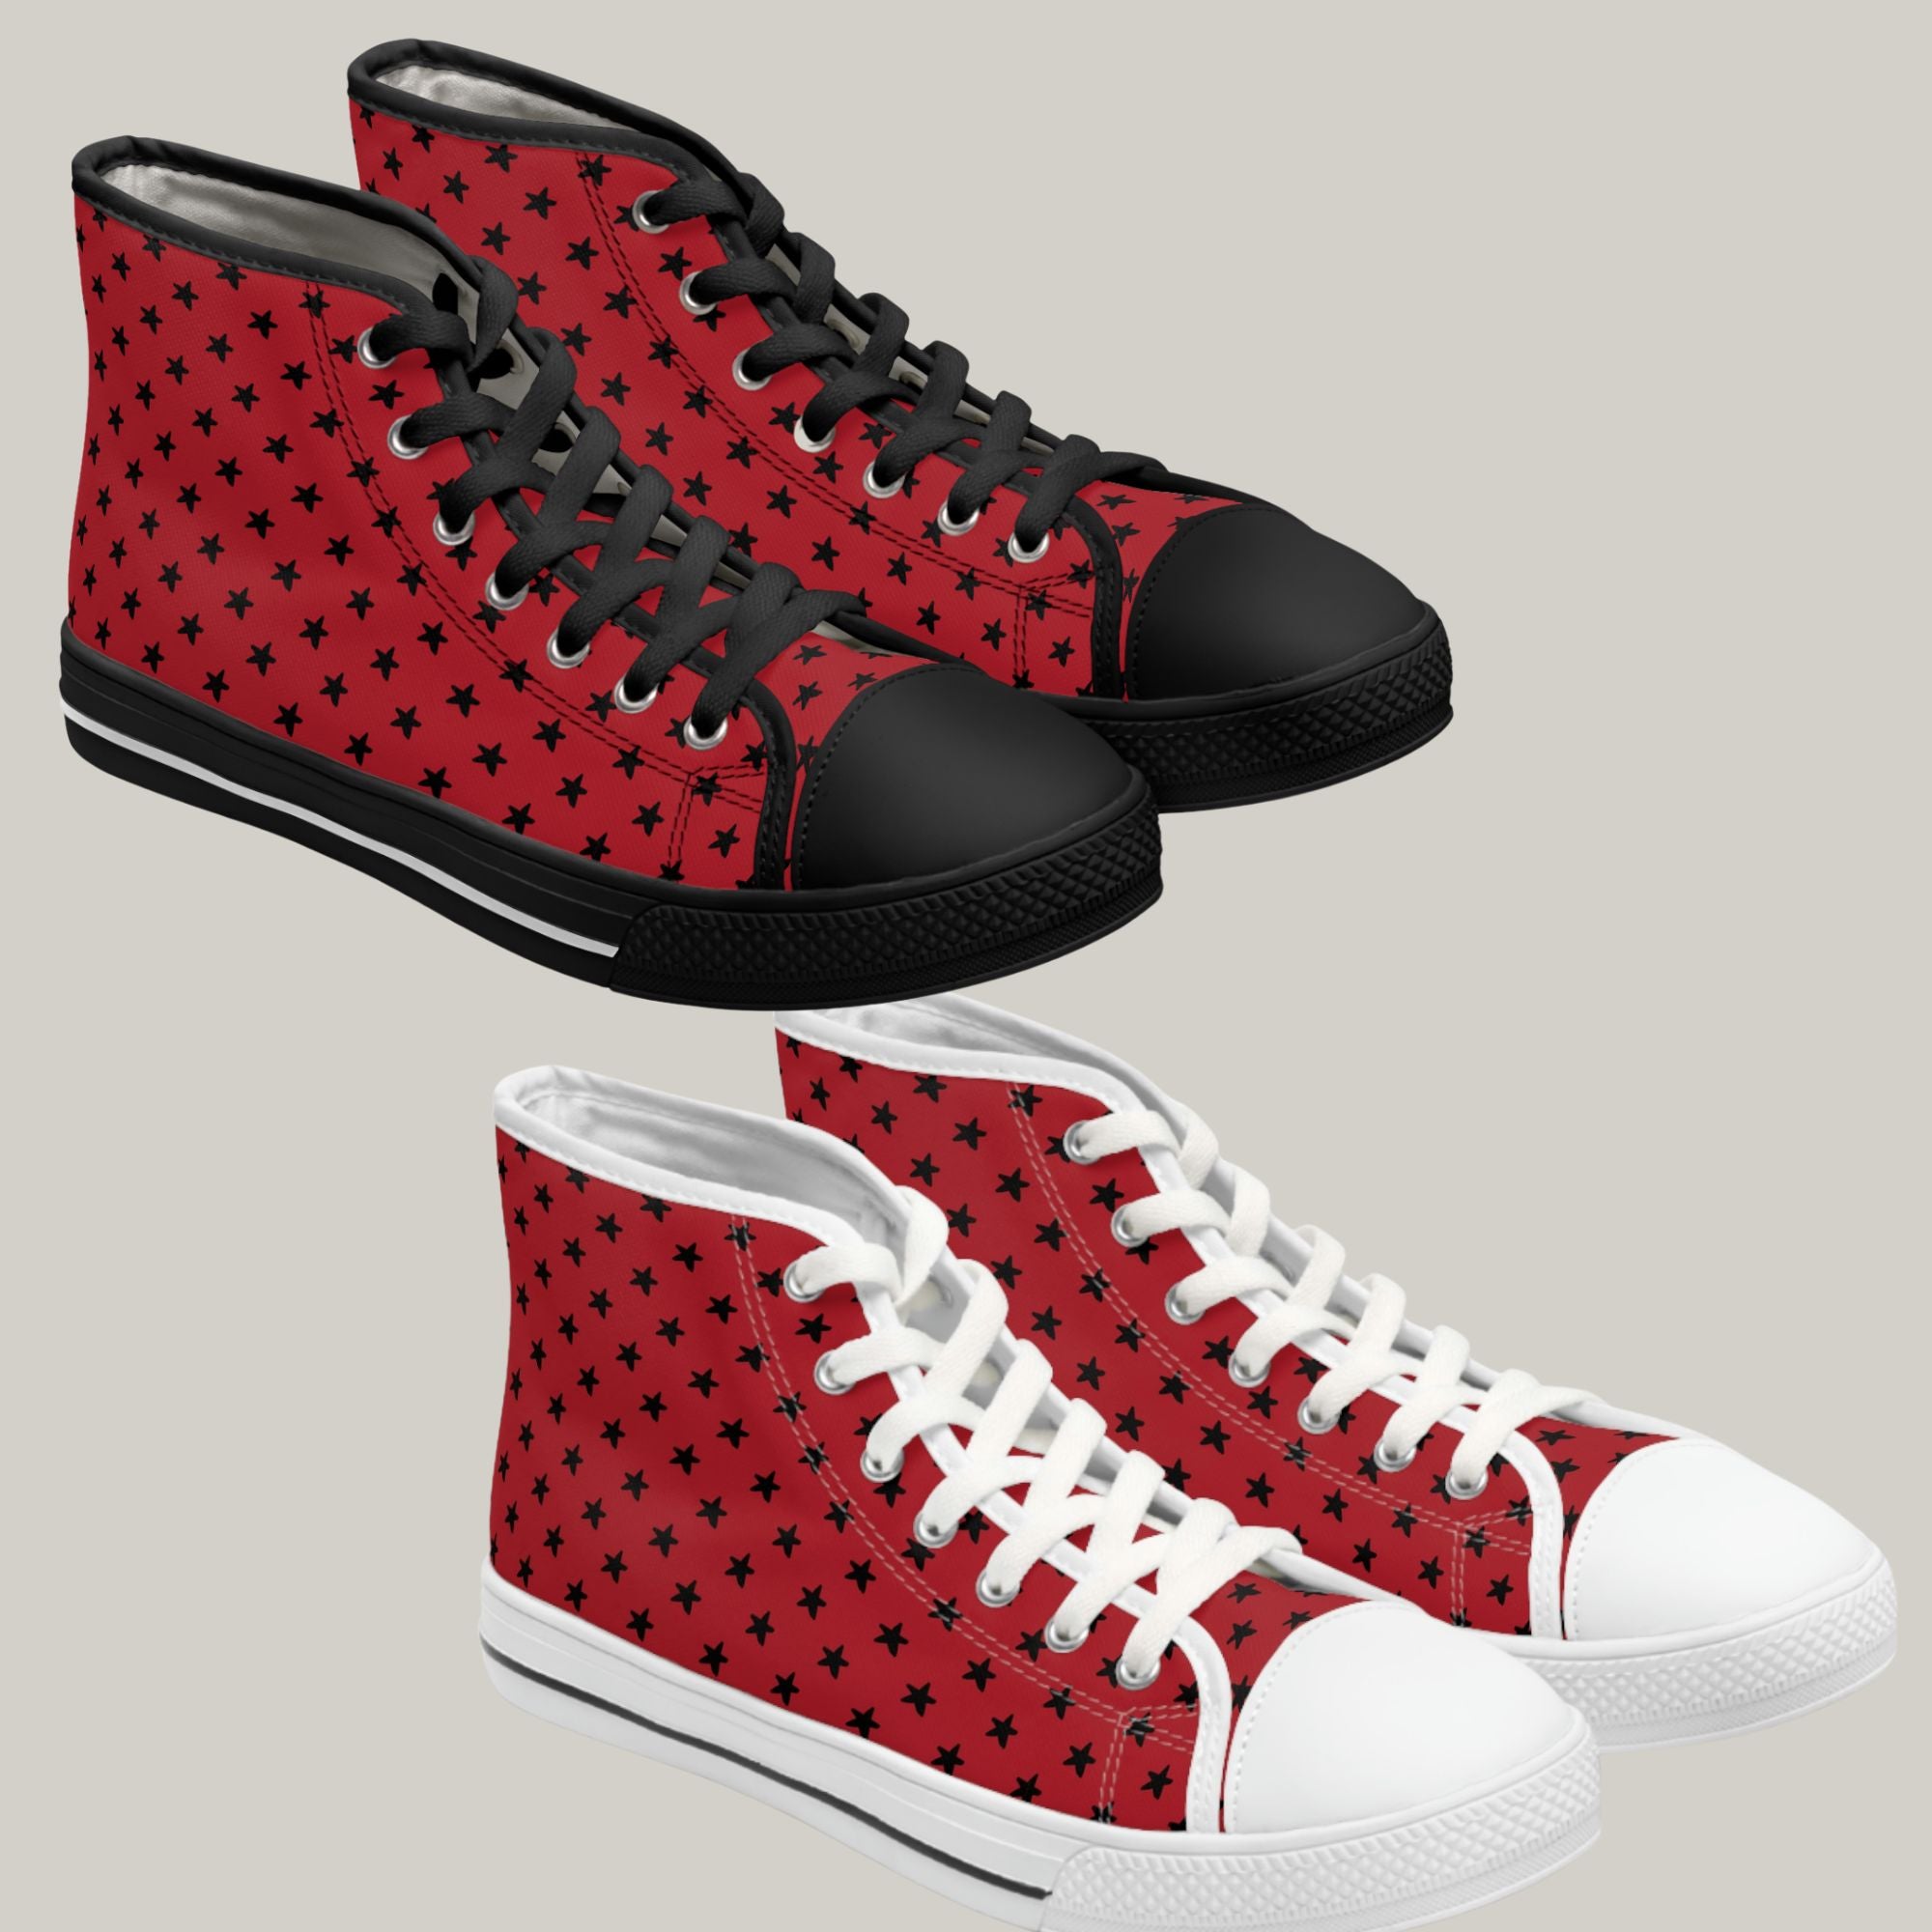 MY STARS BLACK & RED - Women's High Top Sneakers Black and White Soles